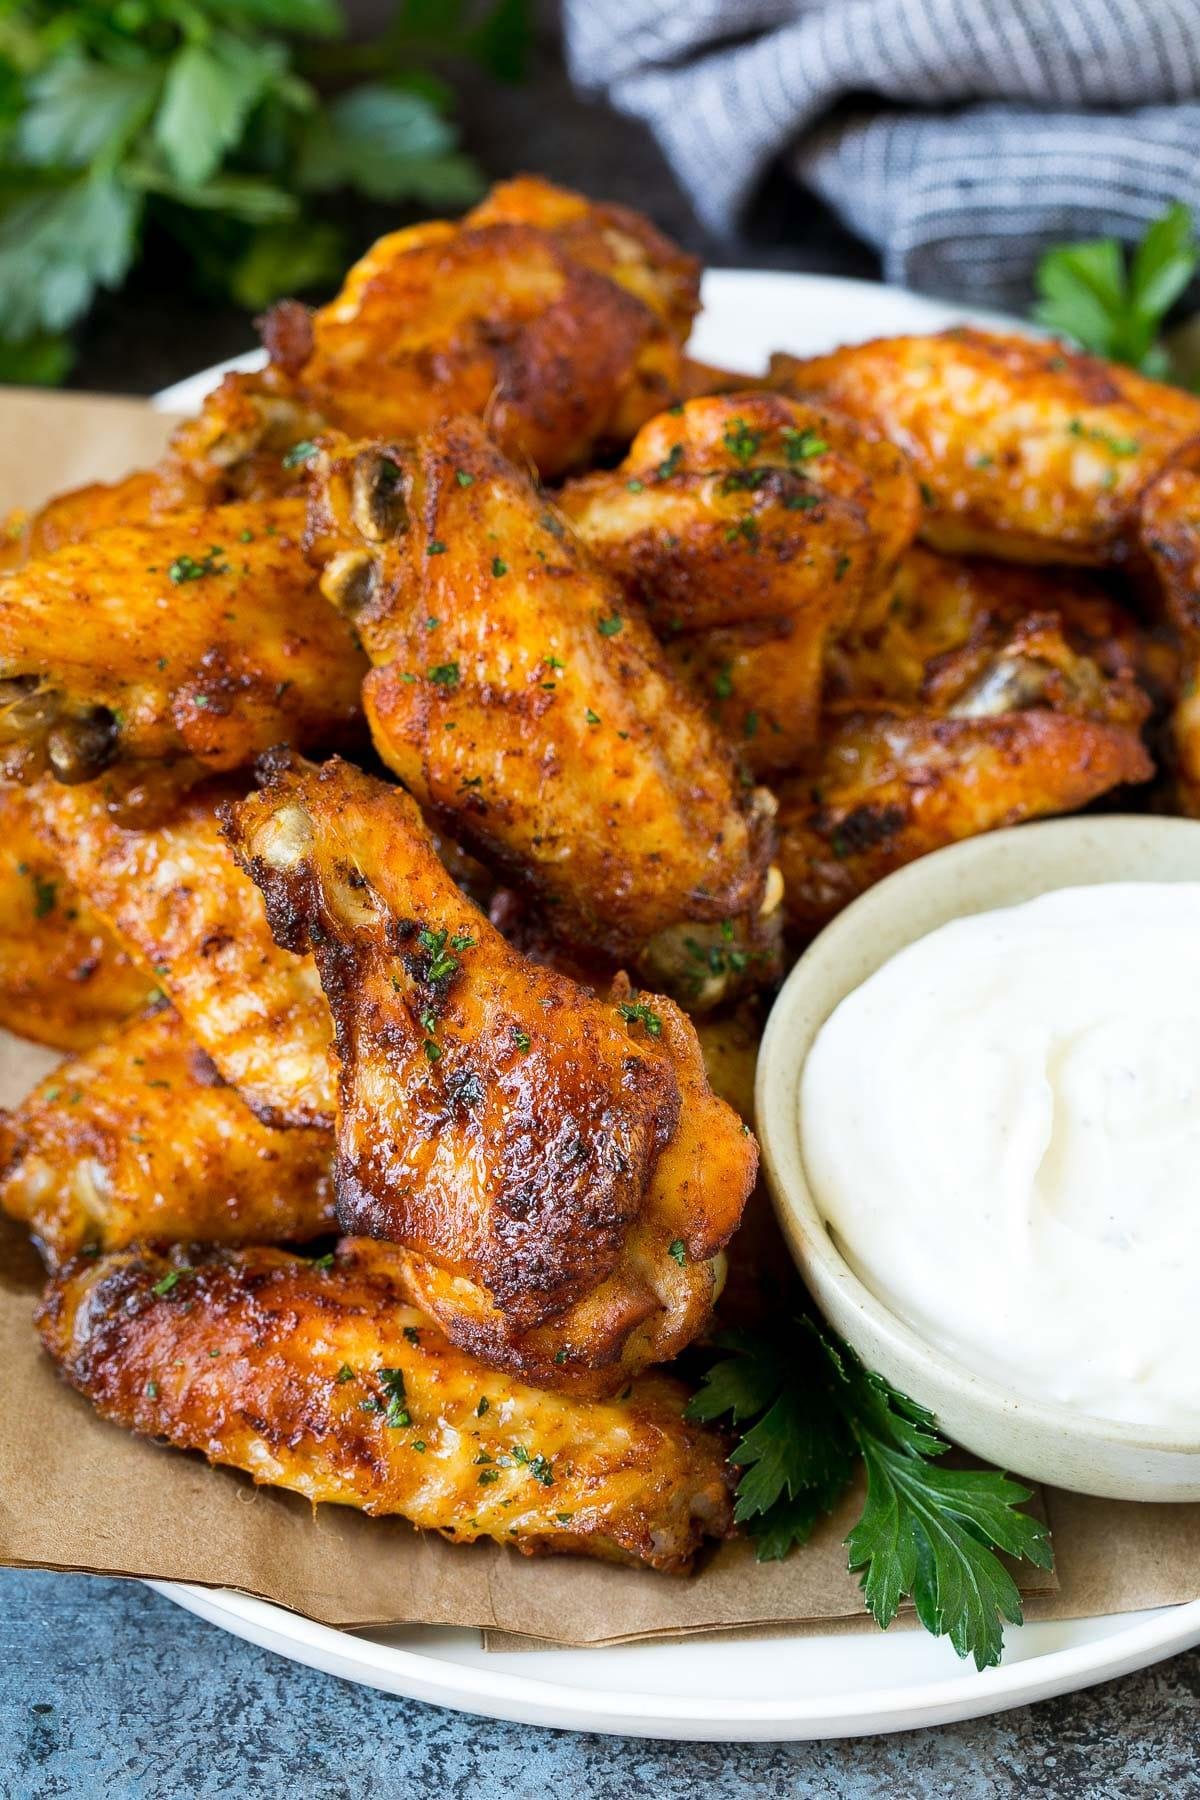 Crispy Baked Chicken Wings - The Ultimate Game Day Snack